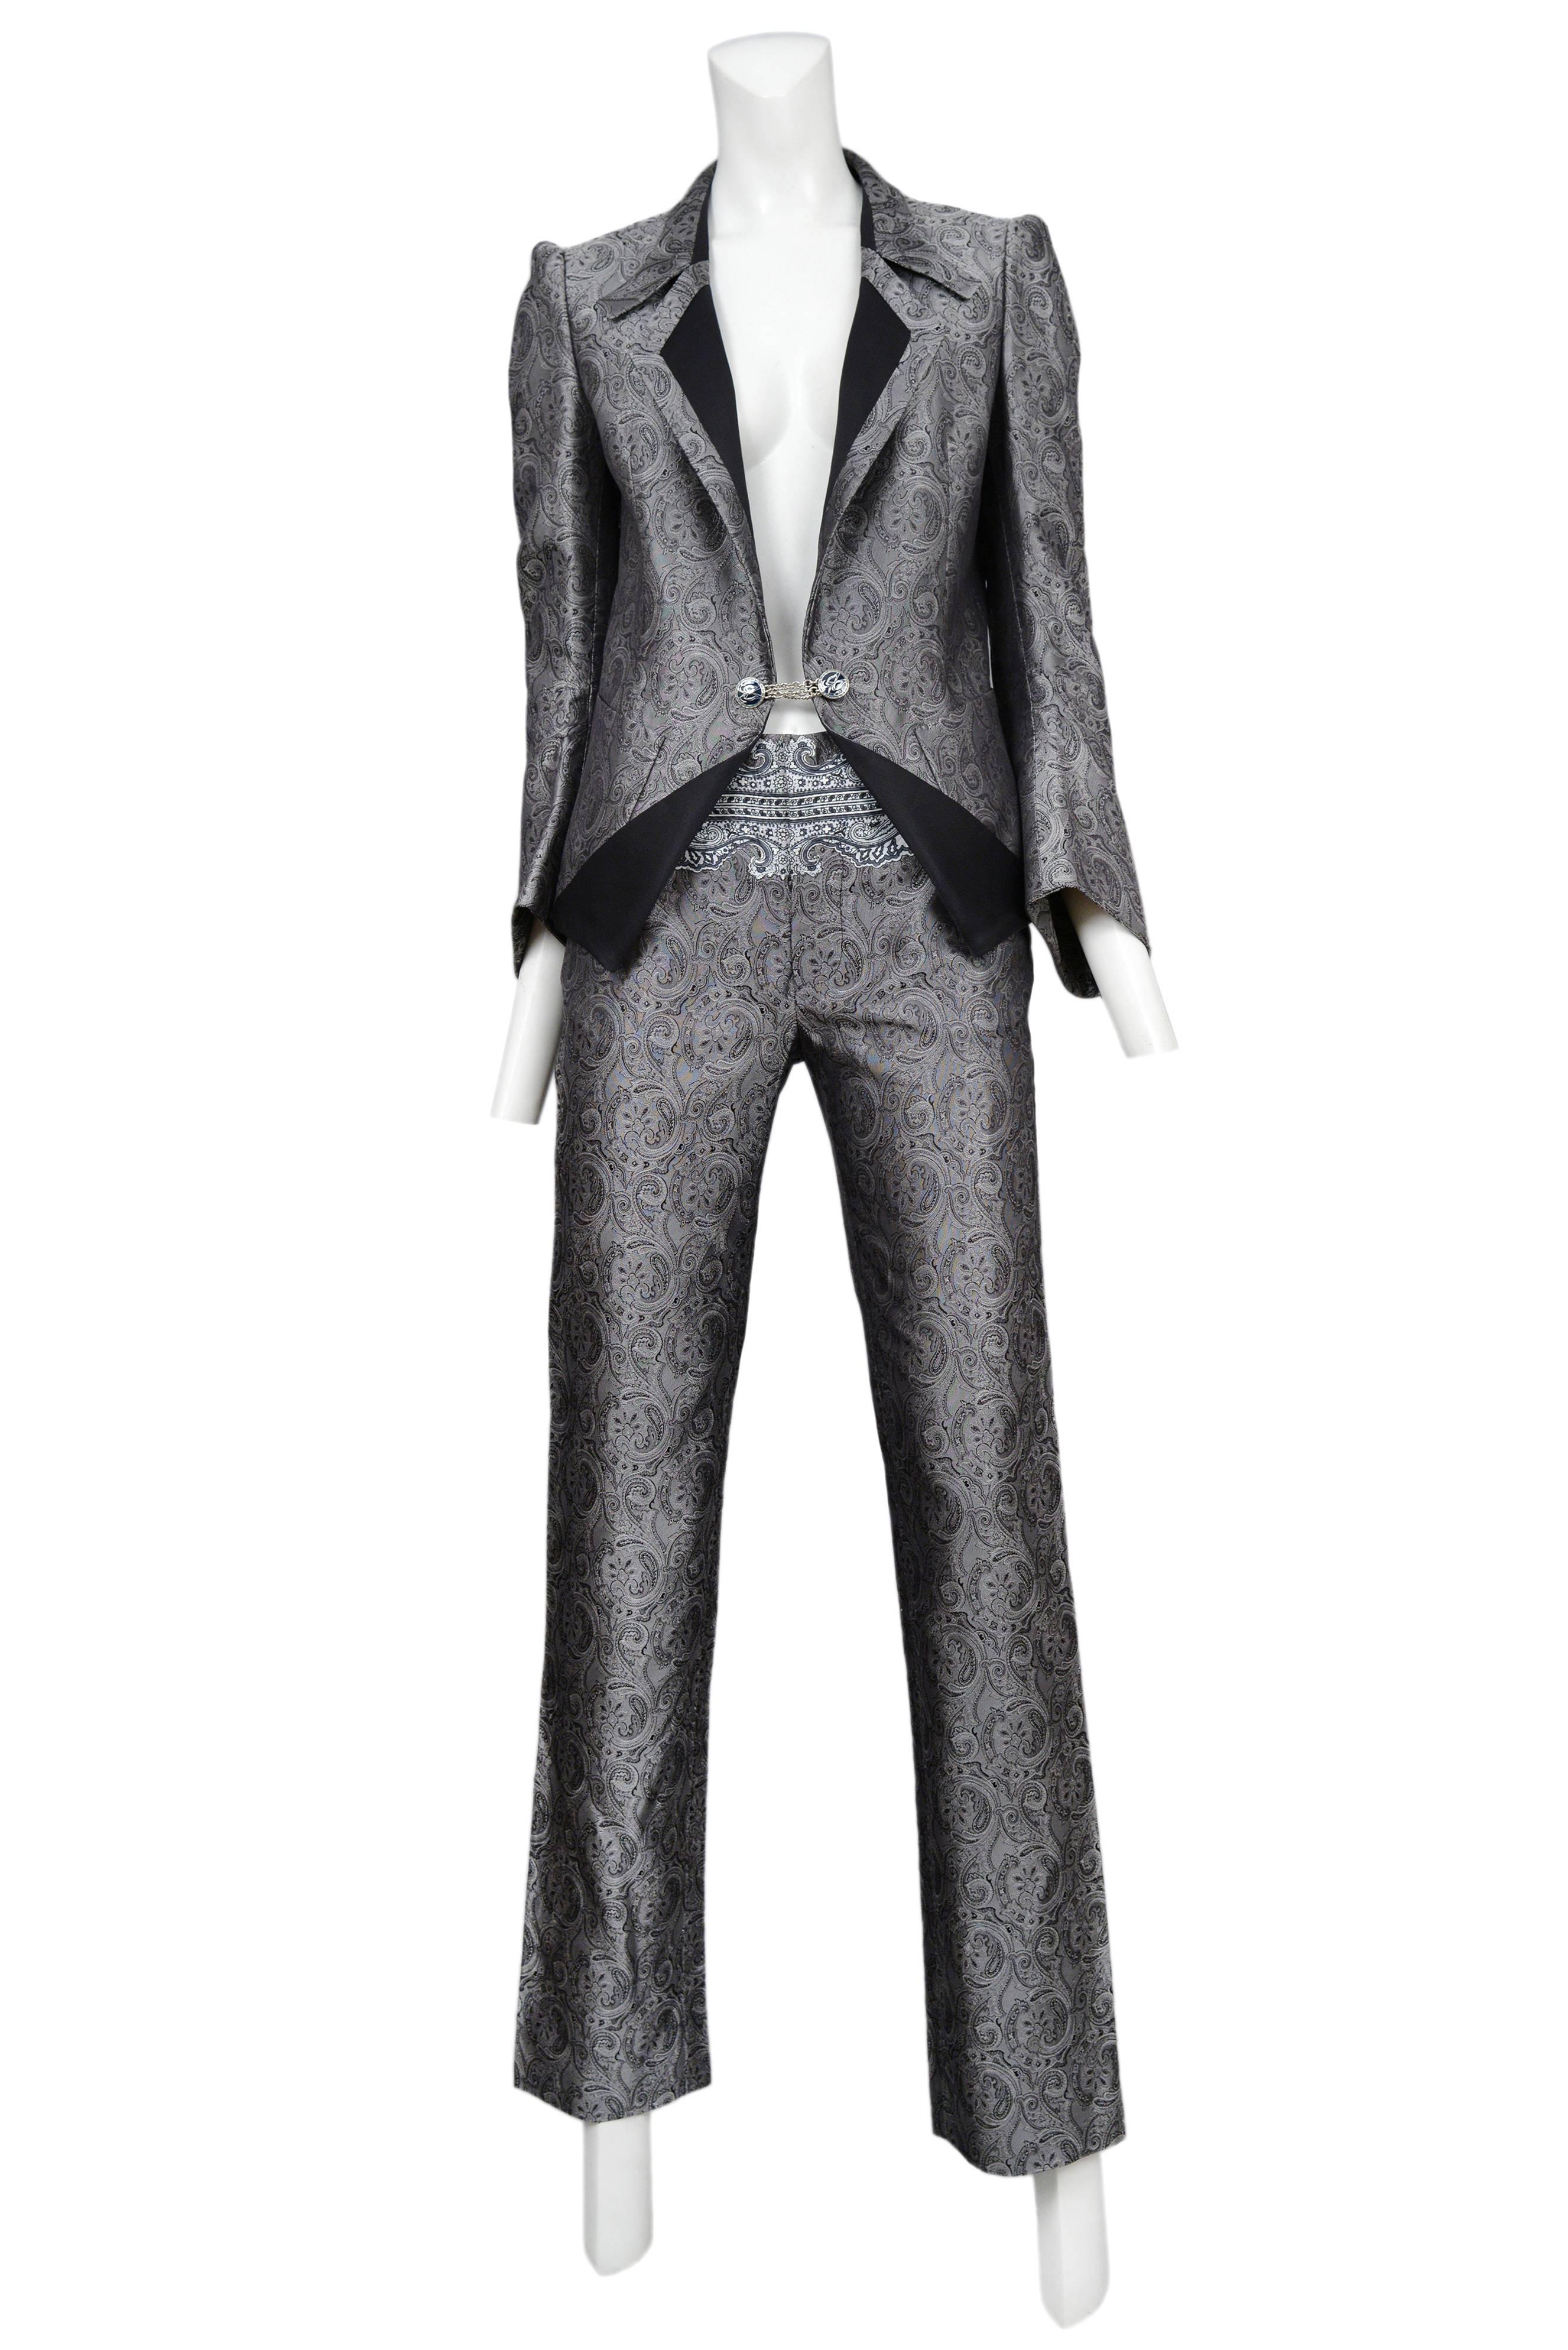 Vintage Nicolas Ghesquière for Balenciaga silver paisley suit featuring a fitted blazer with black trim and chain link buttons and matching pants adorned with a Baroque style print at the upper waist. Runway ensemble from the Spring / Summer 2006